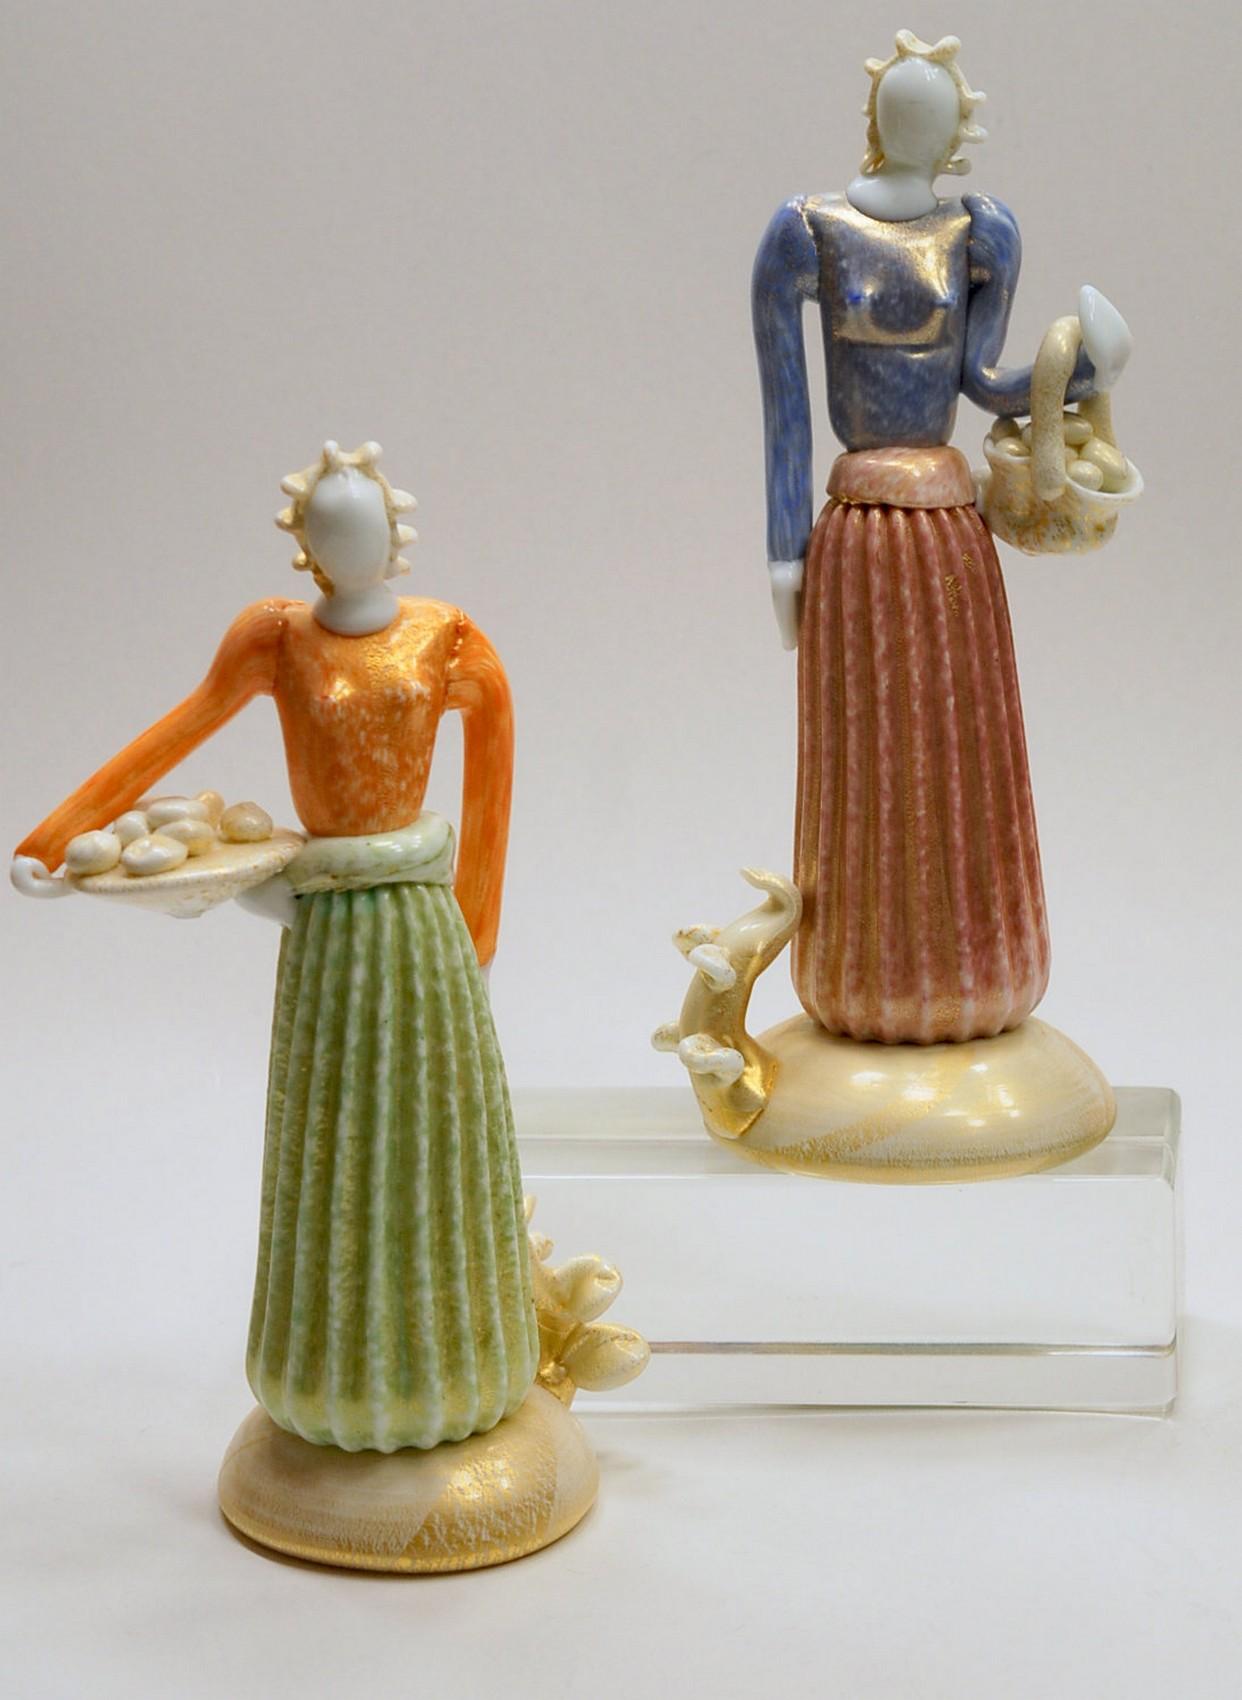 Two well executed Contadine from Ercole Barovier. 

The design of the figure is stylized, probably influenced by De Chirico first metafisica painting. The dress has connection with 